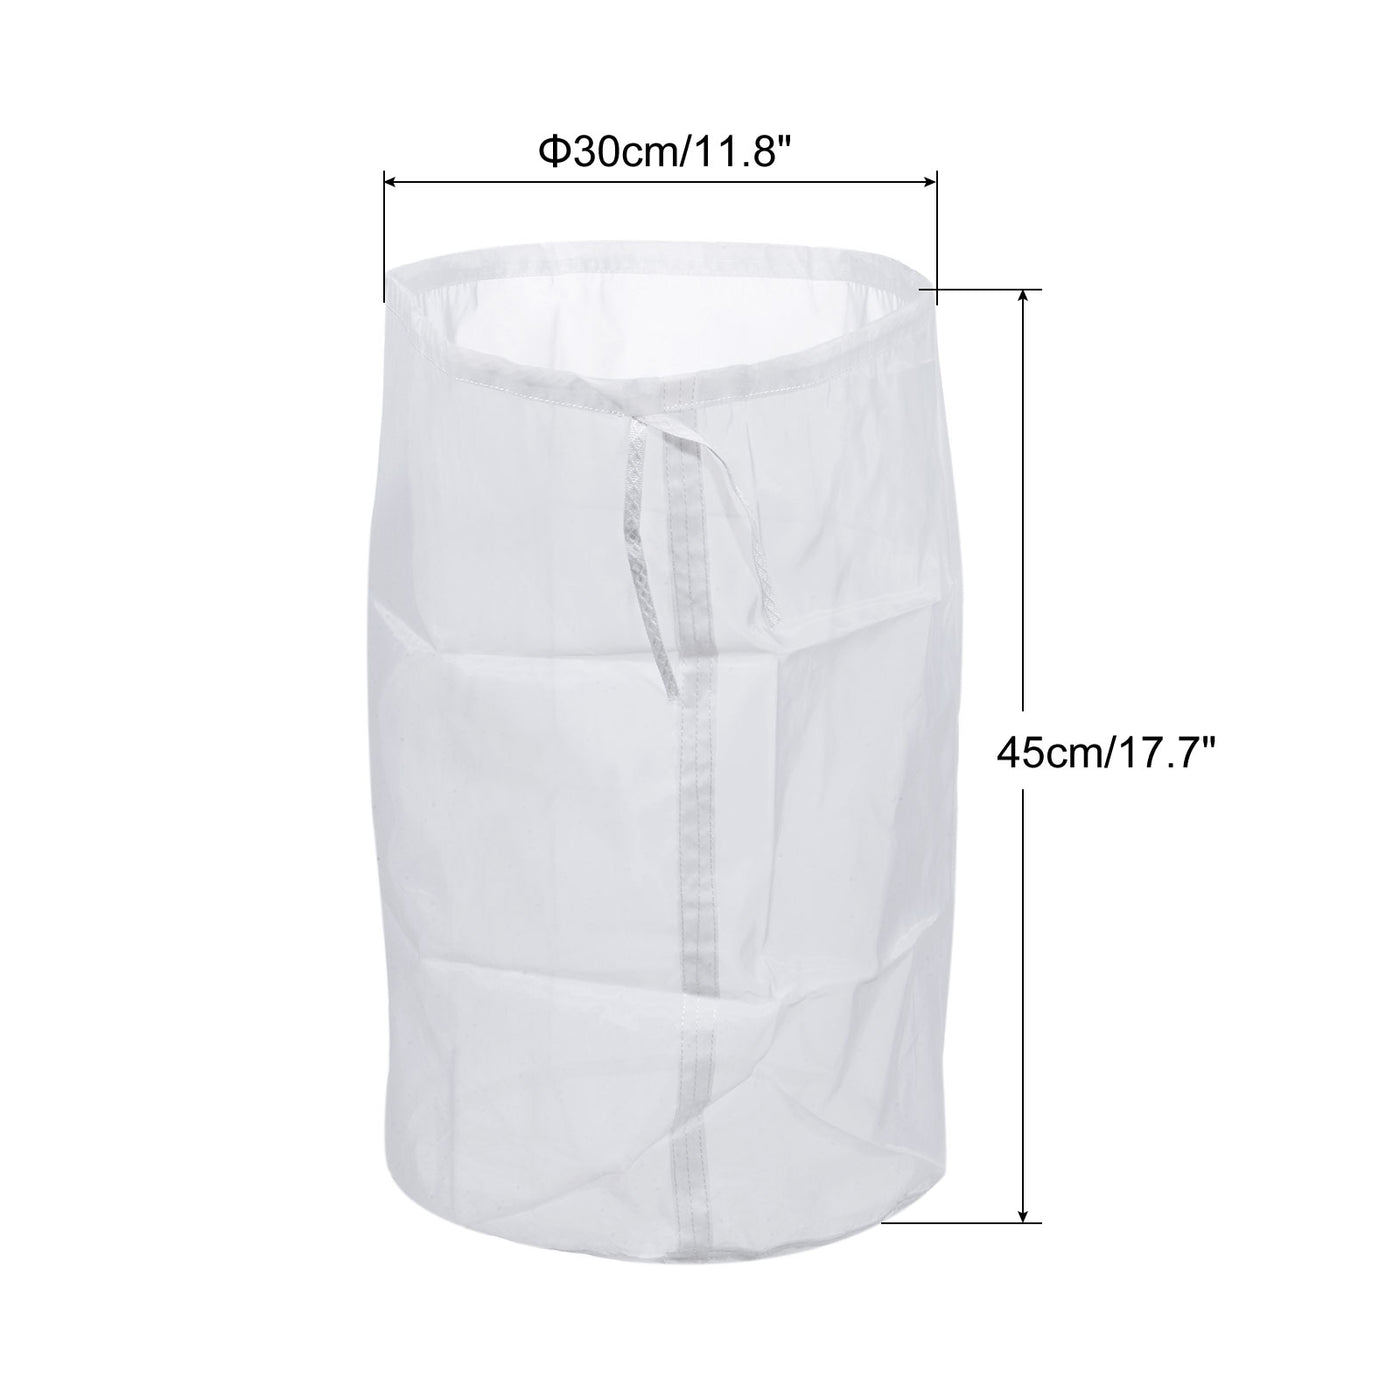 uxcell Uxcell 80 Mesh Paint Filter Bag 11.8" Dia Nylon Strainer with Drawstring for Filtering